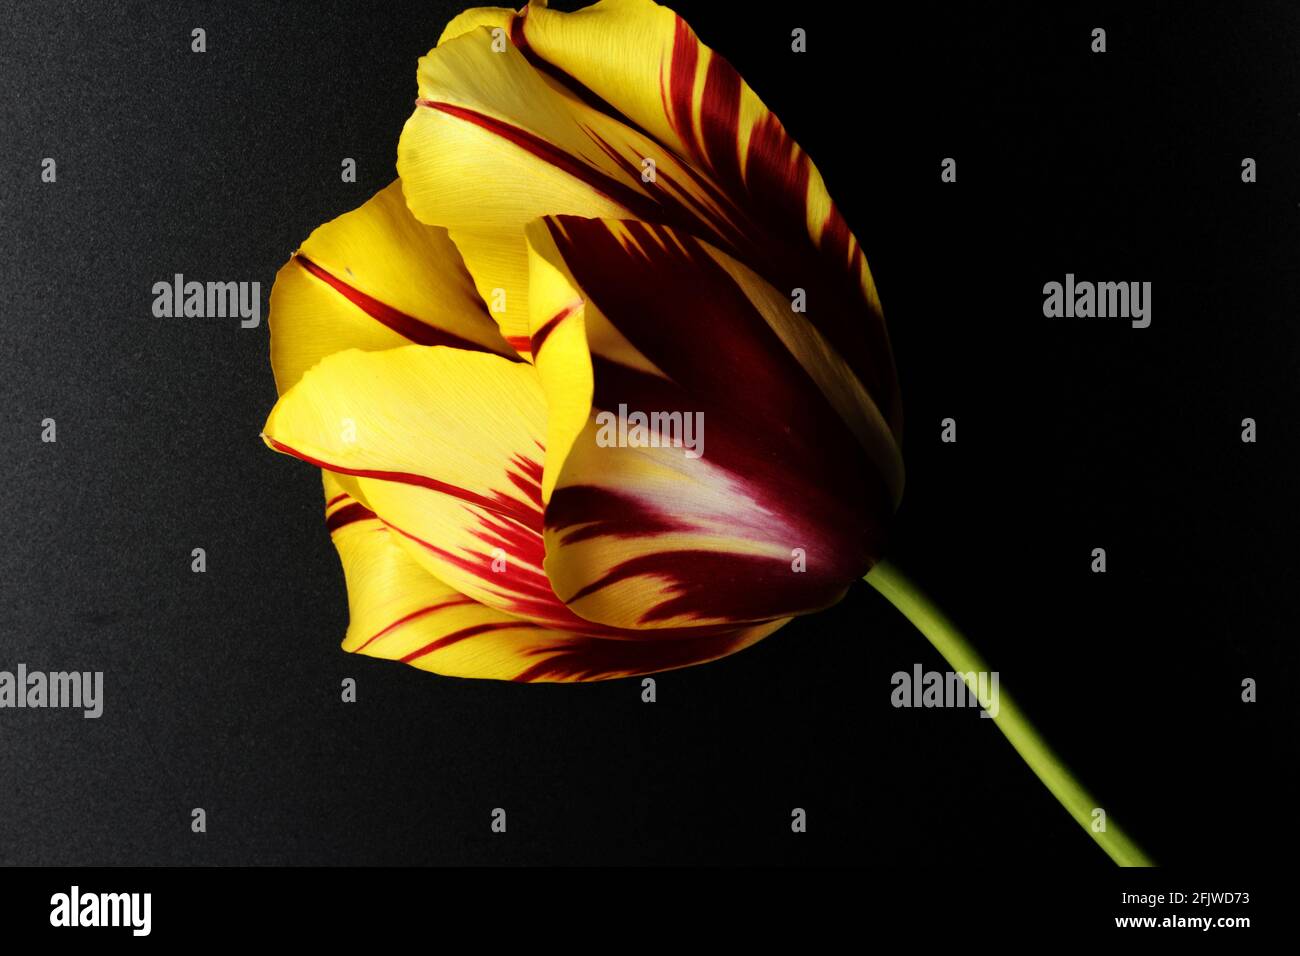 yellow and maroon tulip on a black background placed in the center of the frame, Tulipa gesneriana Stock Photo